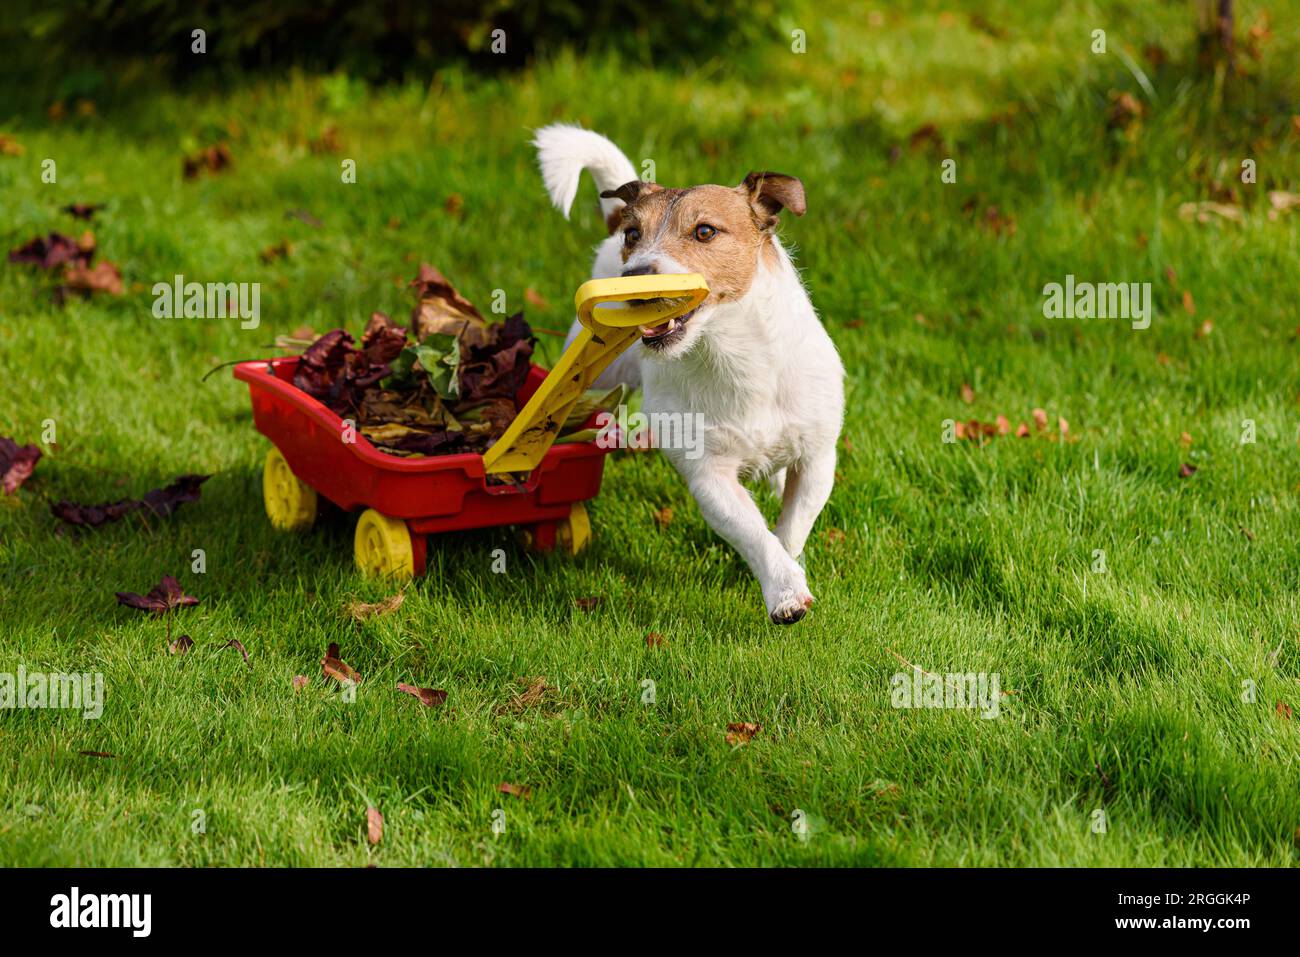 Dog pulls cart full of raked Fall leaves on green grass in garden. Autumn clean up humorous concept Stock Photo